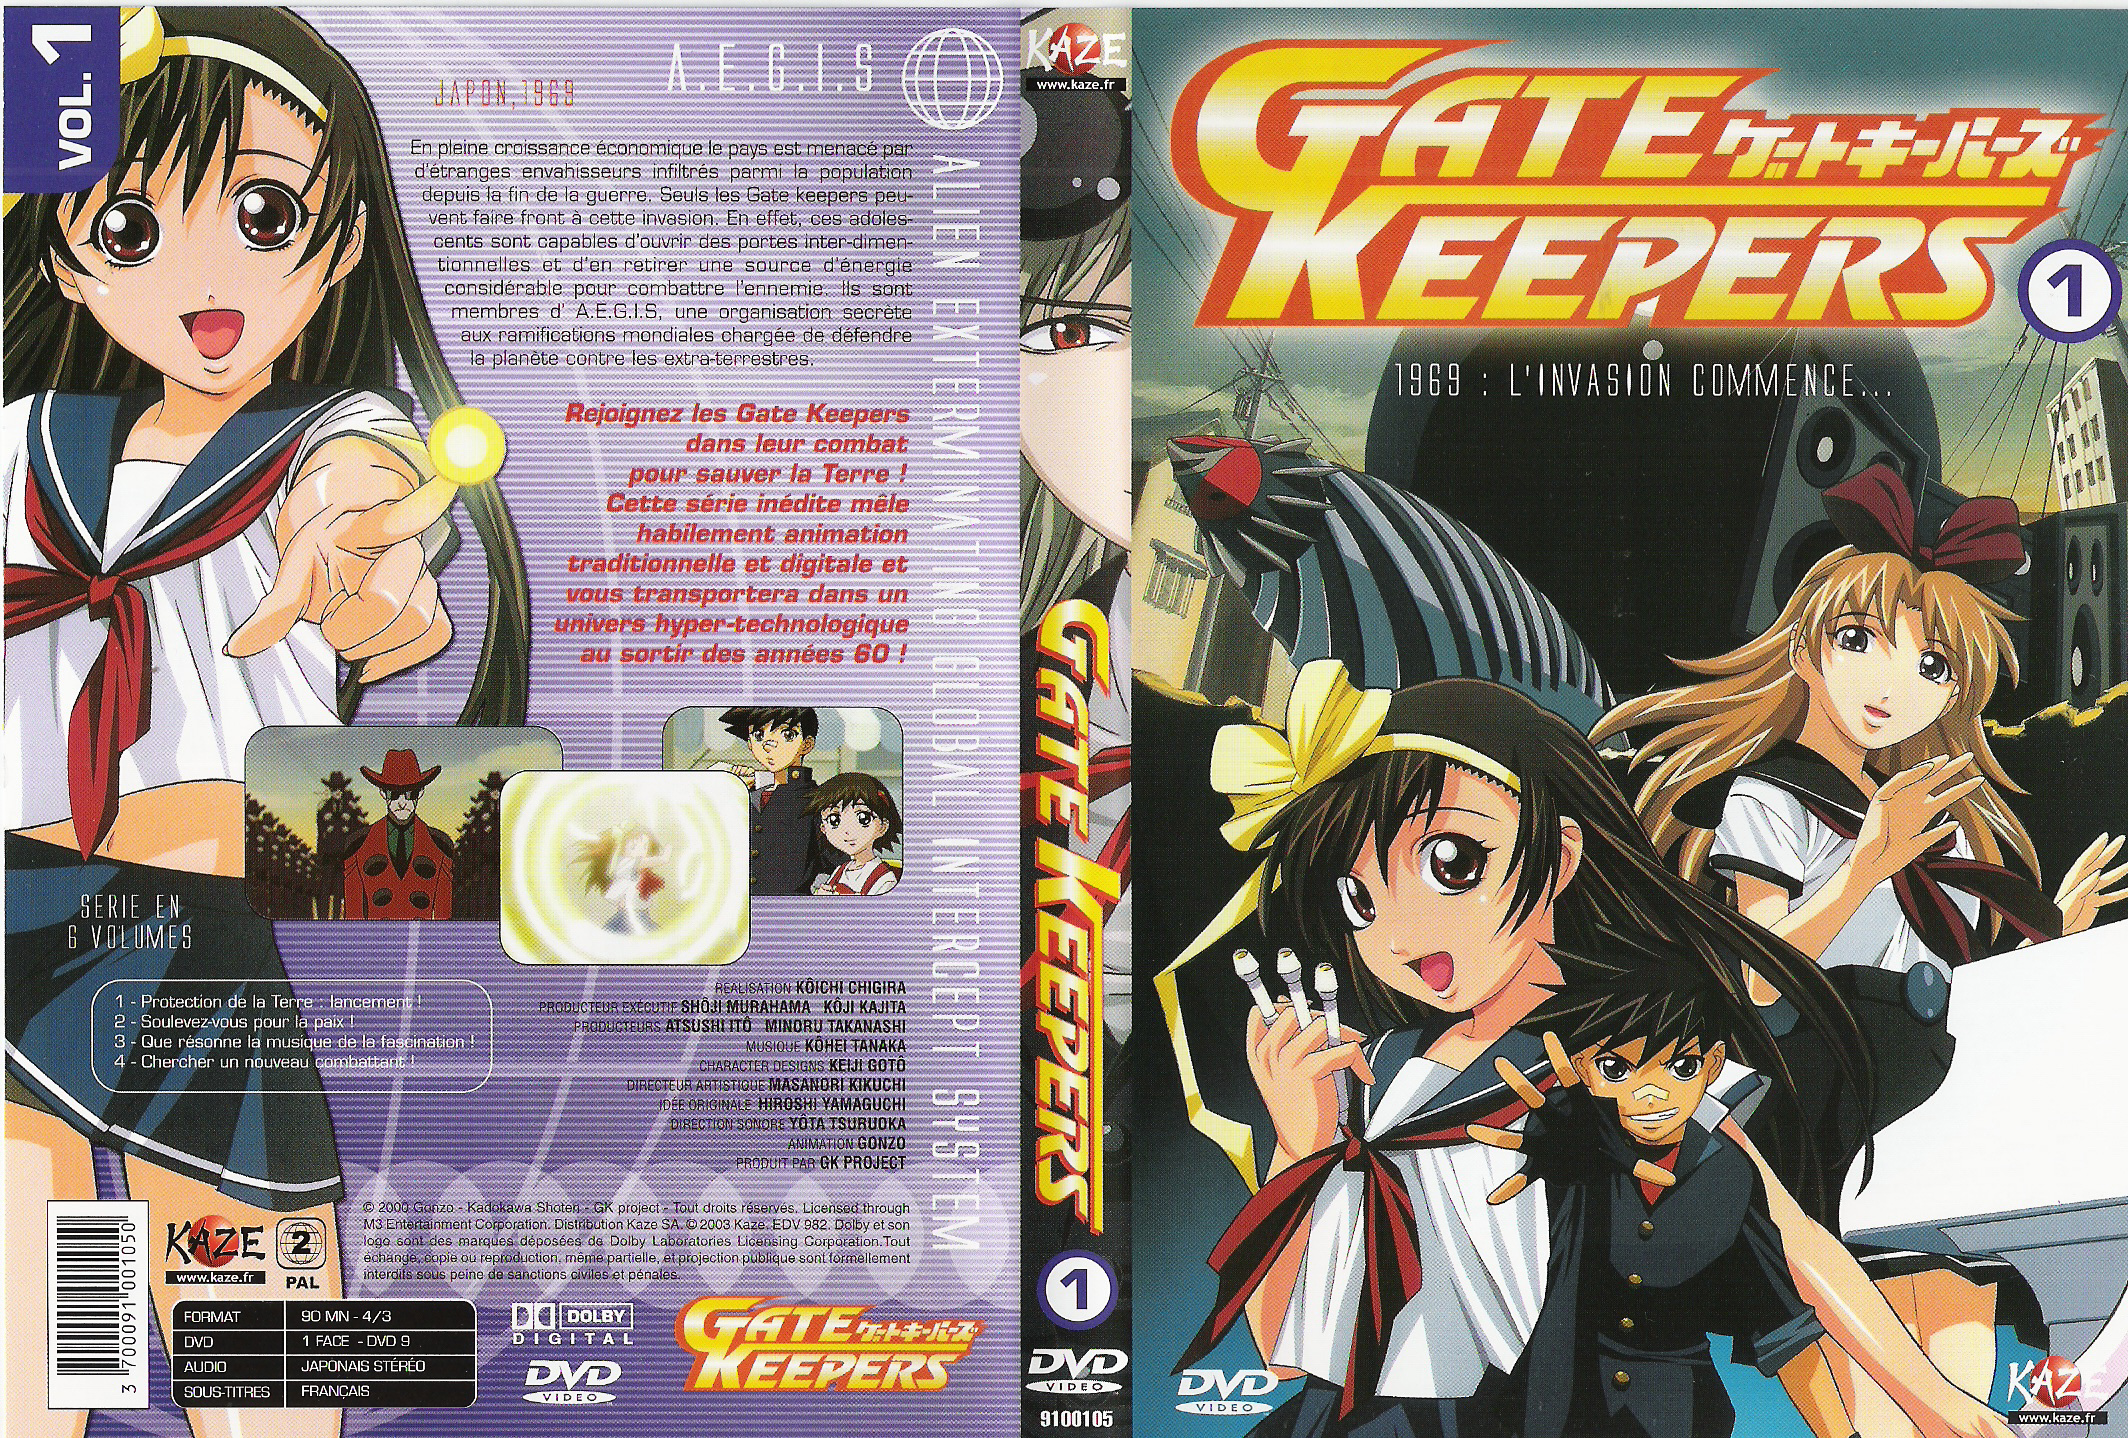 Jaquette DVD Gate Keepers DVD 1